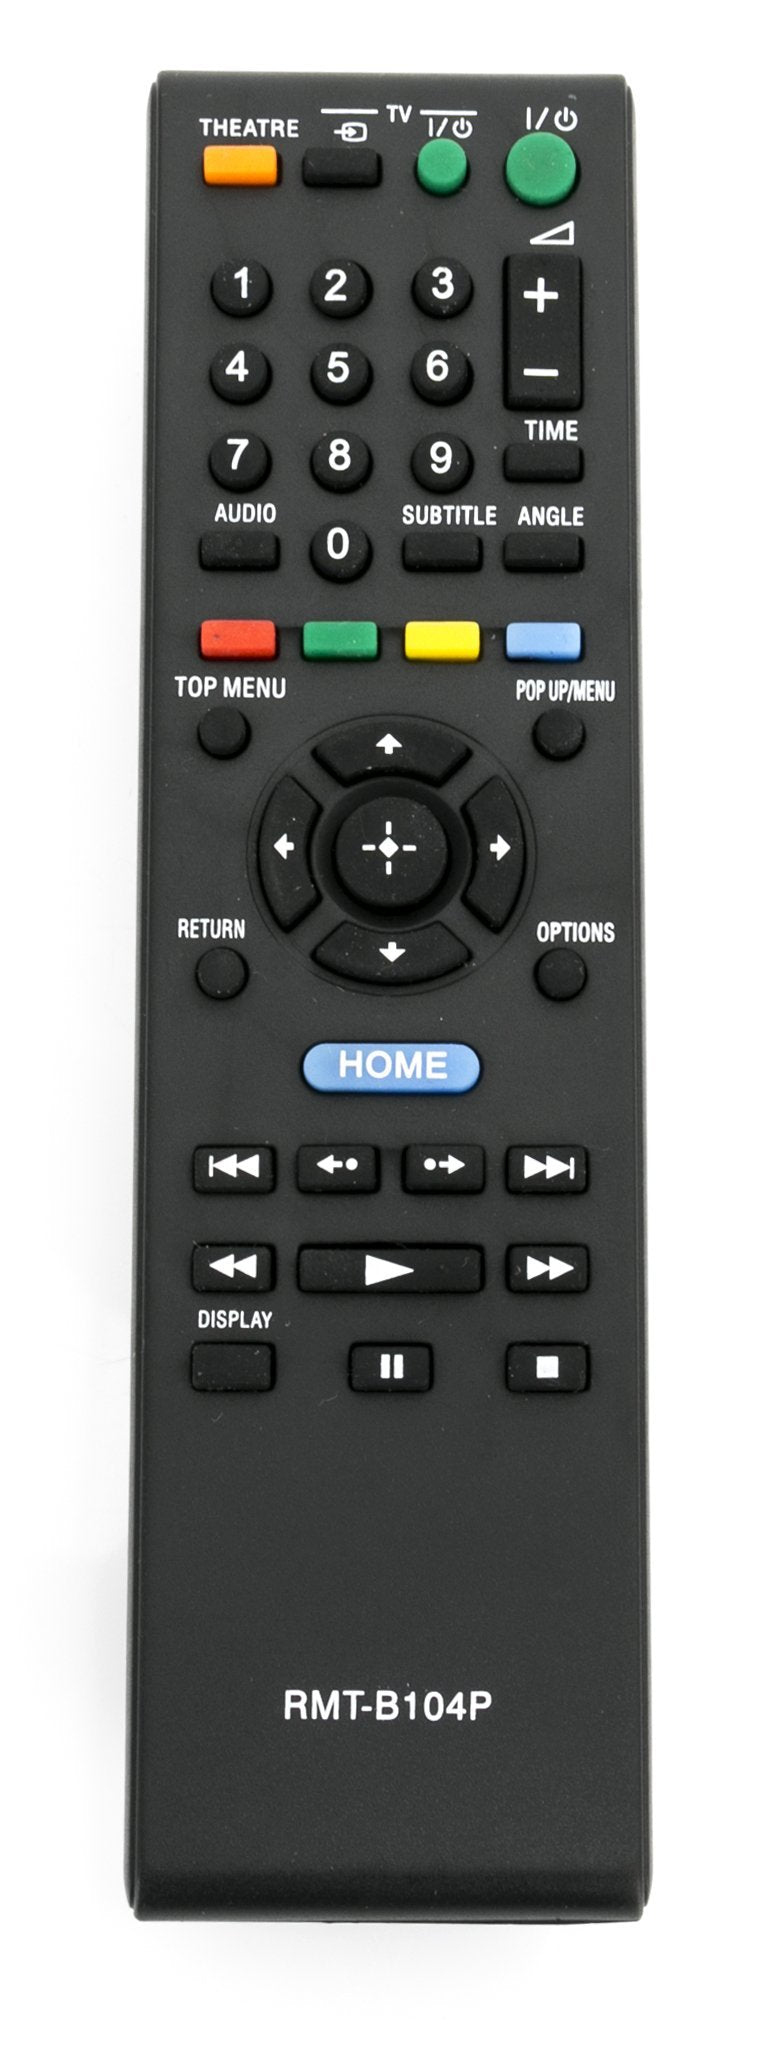 New Remote Control RMT-B104P fits for Sony BLU-RAY DISC Player BDP-S350 BDP-S360 BDP-S480 BDP-S490 BDP-S185 BDP-S270 BDP-S300 BDP-S370 BDP-S380 BDP-S470